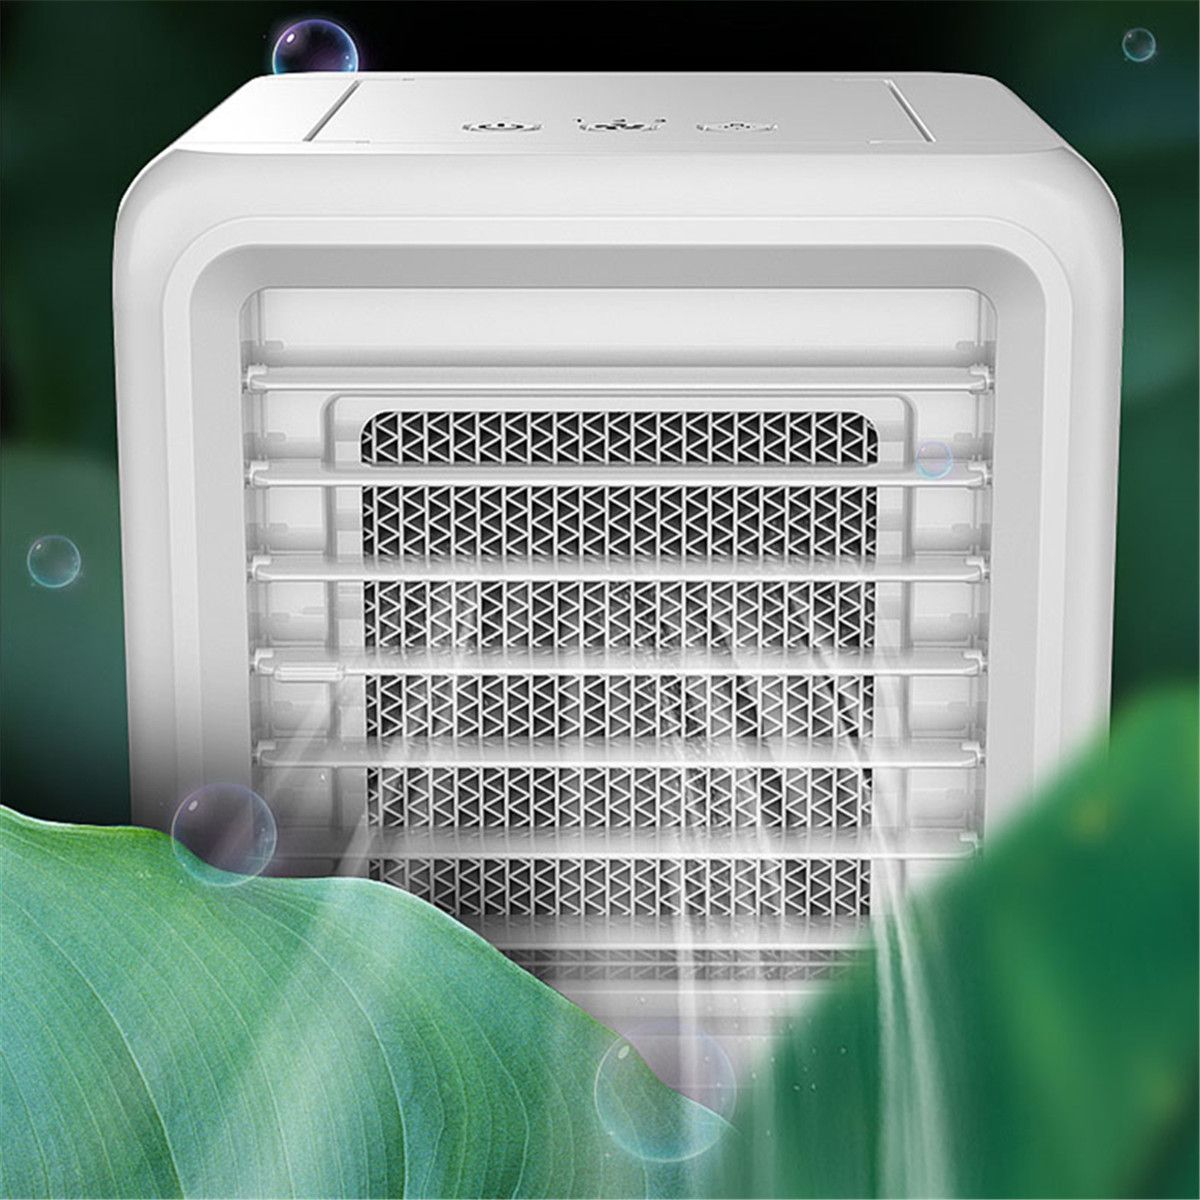 Artic-Air-Cooler-Portable-Mini-Air-Conditioner-Humidifier-Purifier-Cooler-Cooling-Fan-1635966